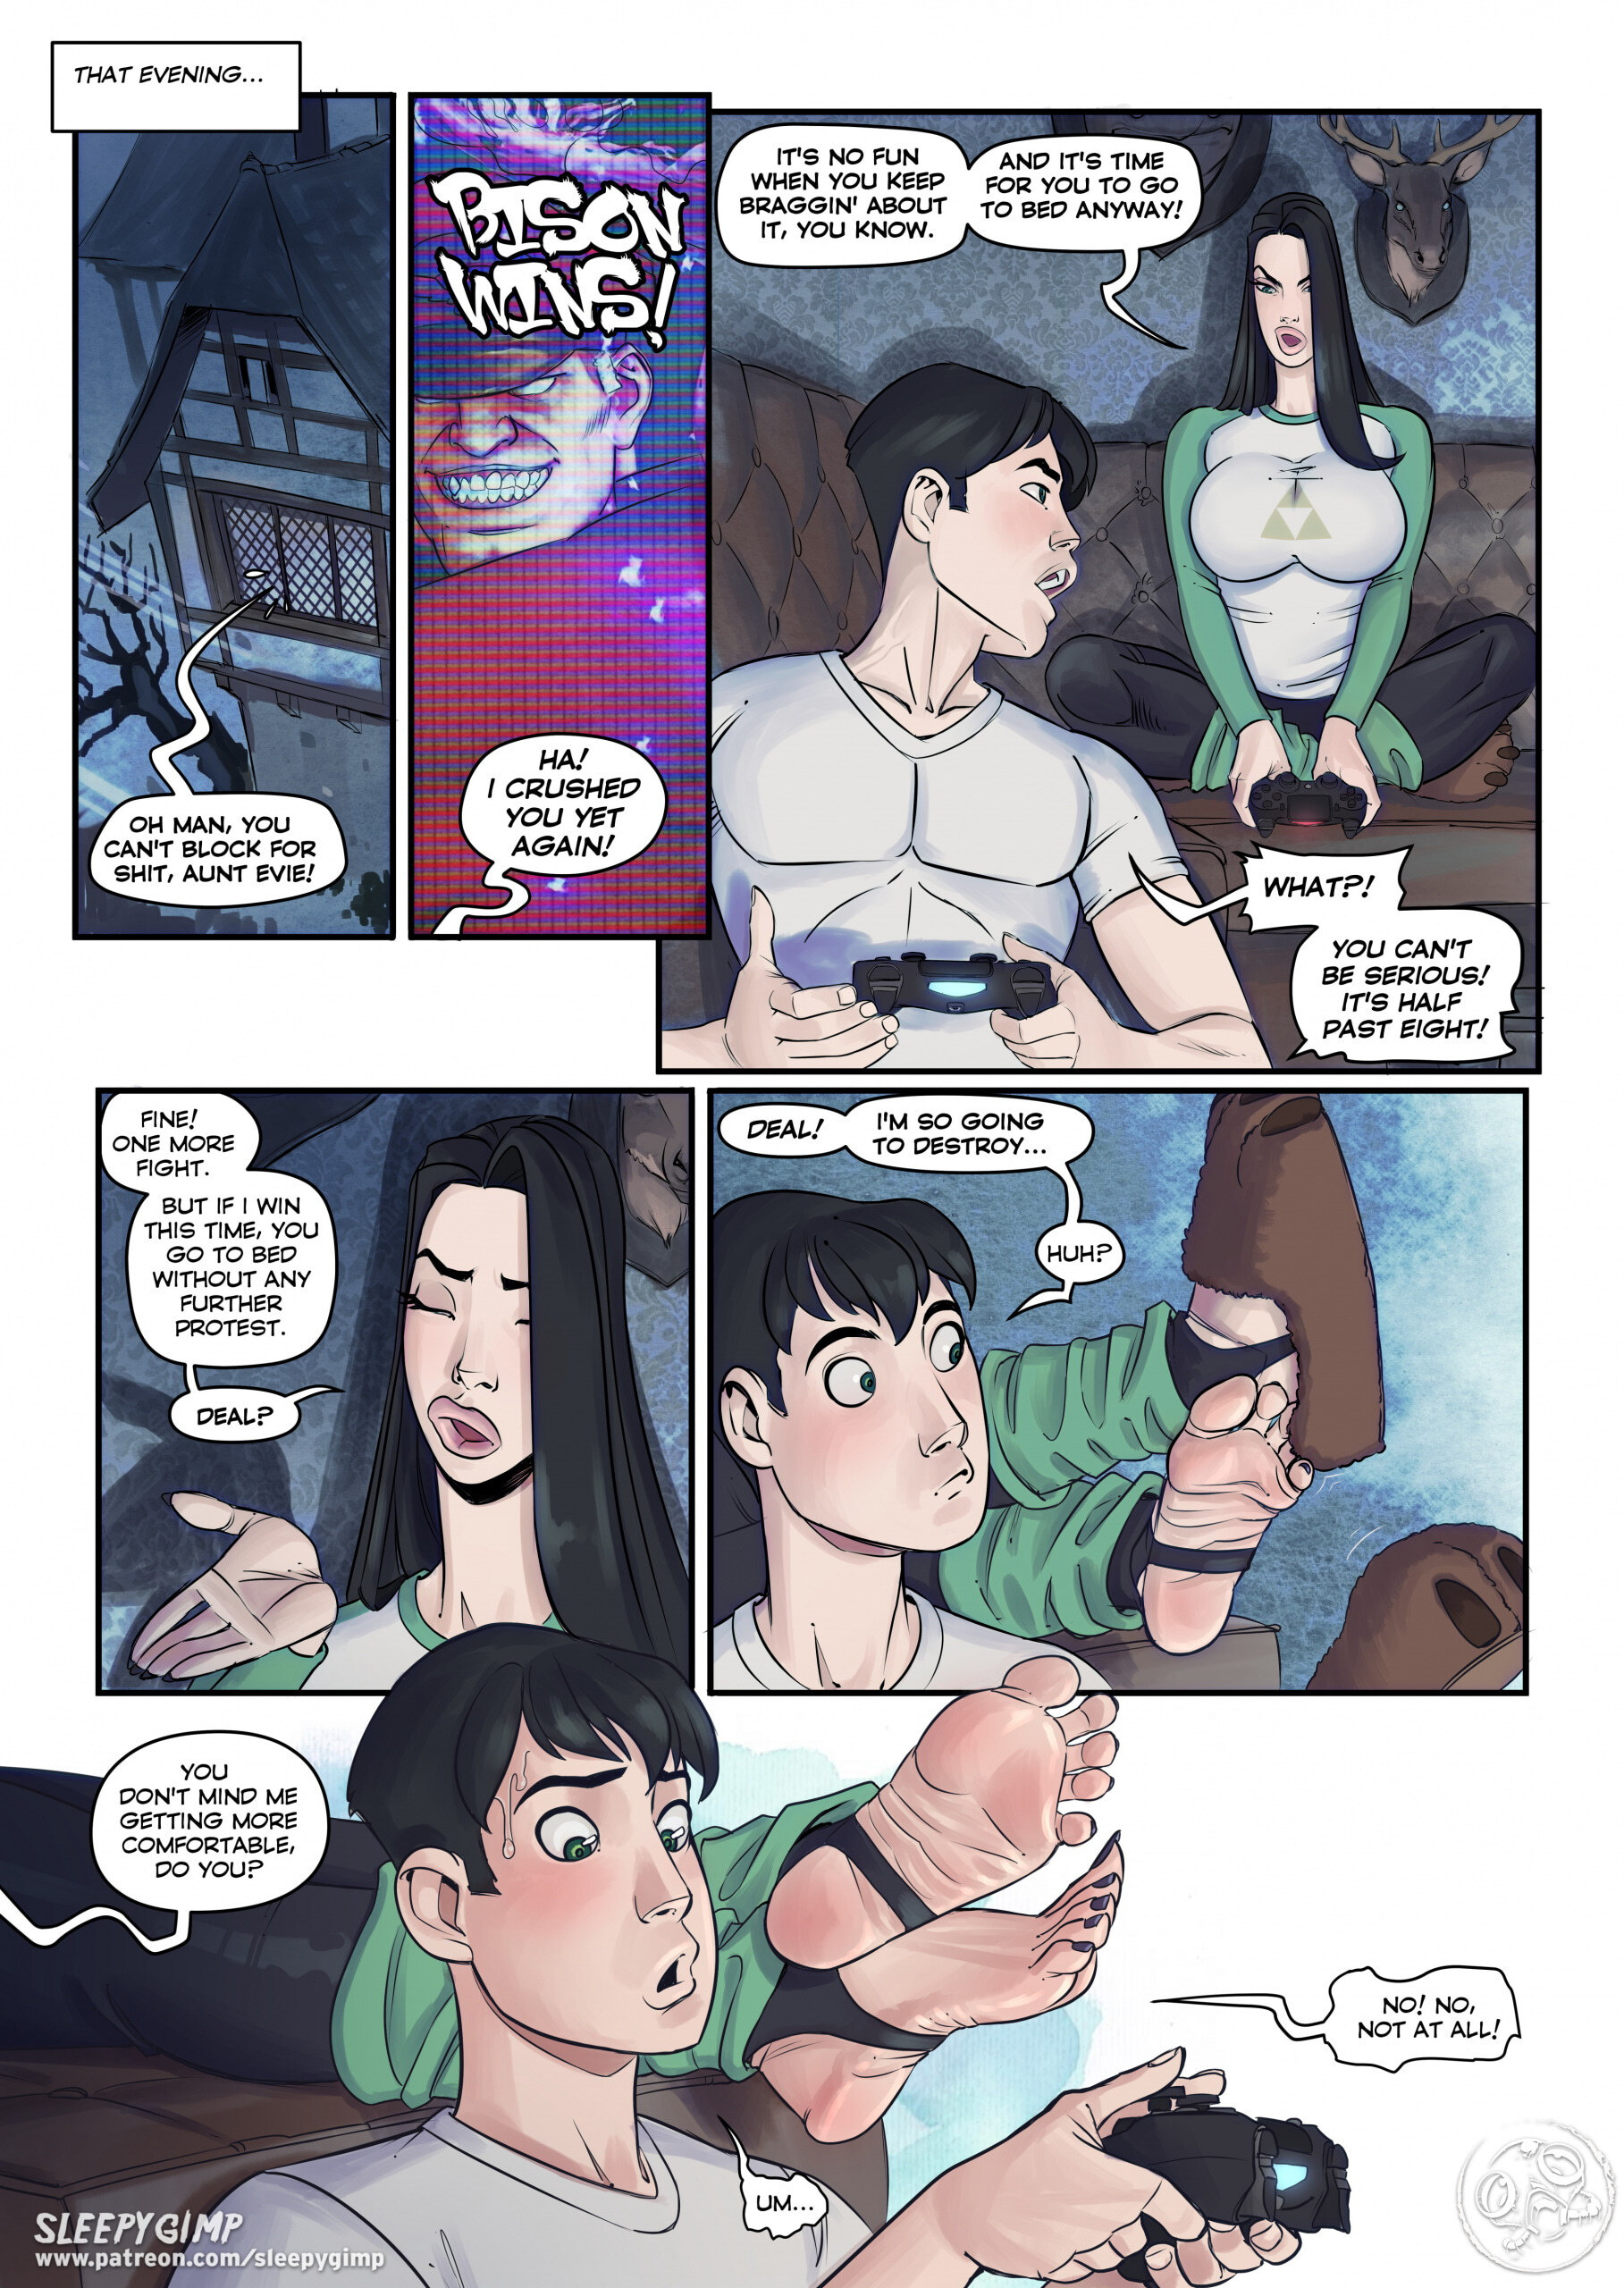 Family Values 2 - Page 7